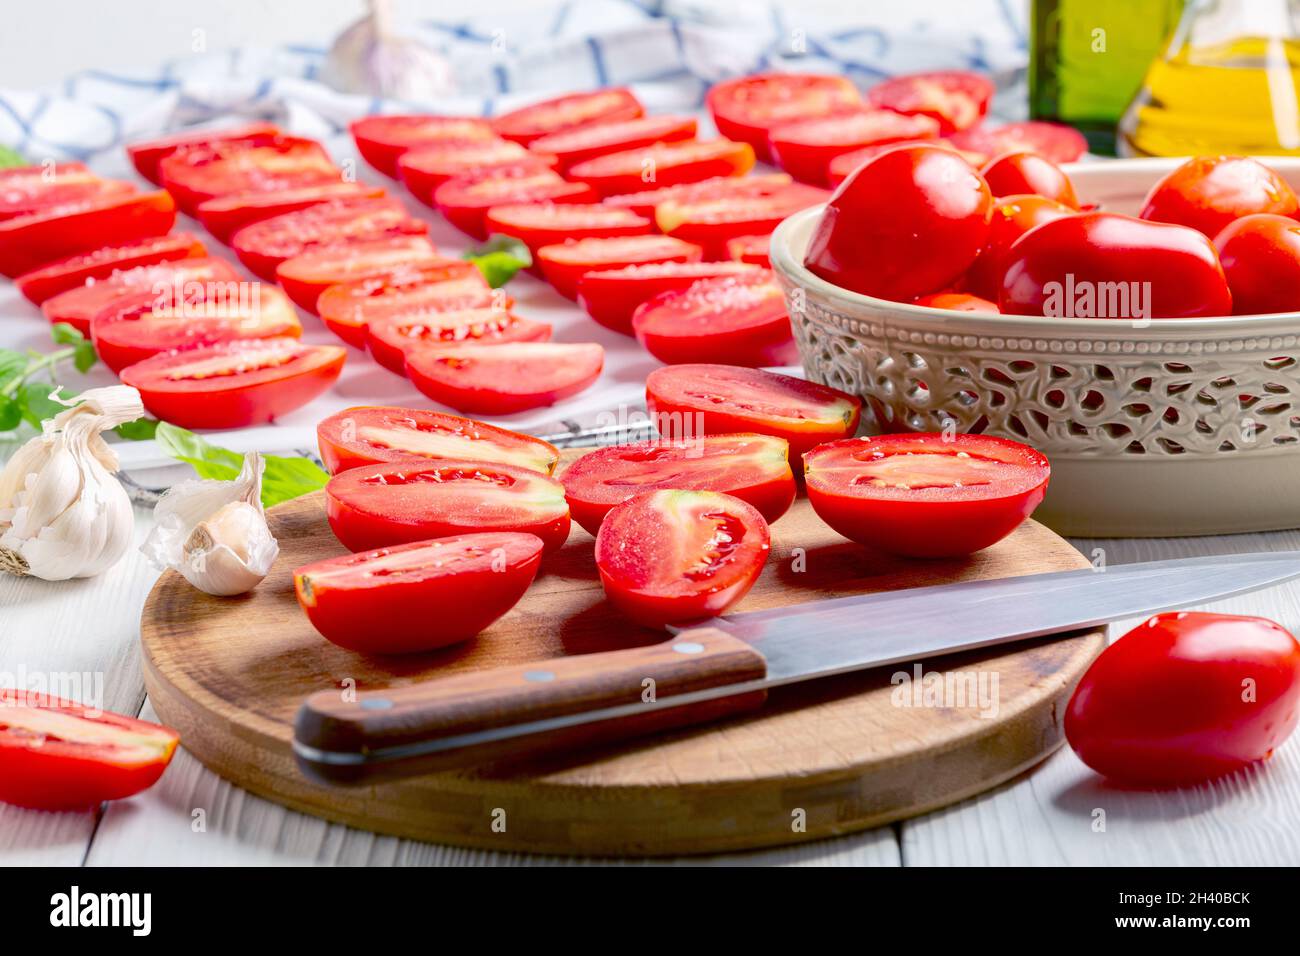 Preparation of dried tomatoes. Stock Photo